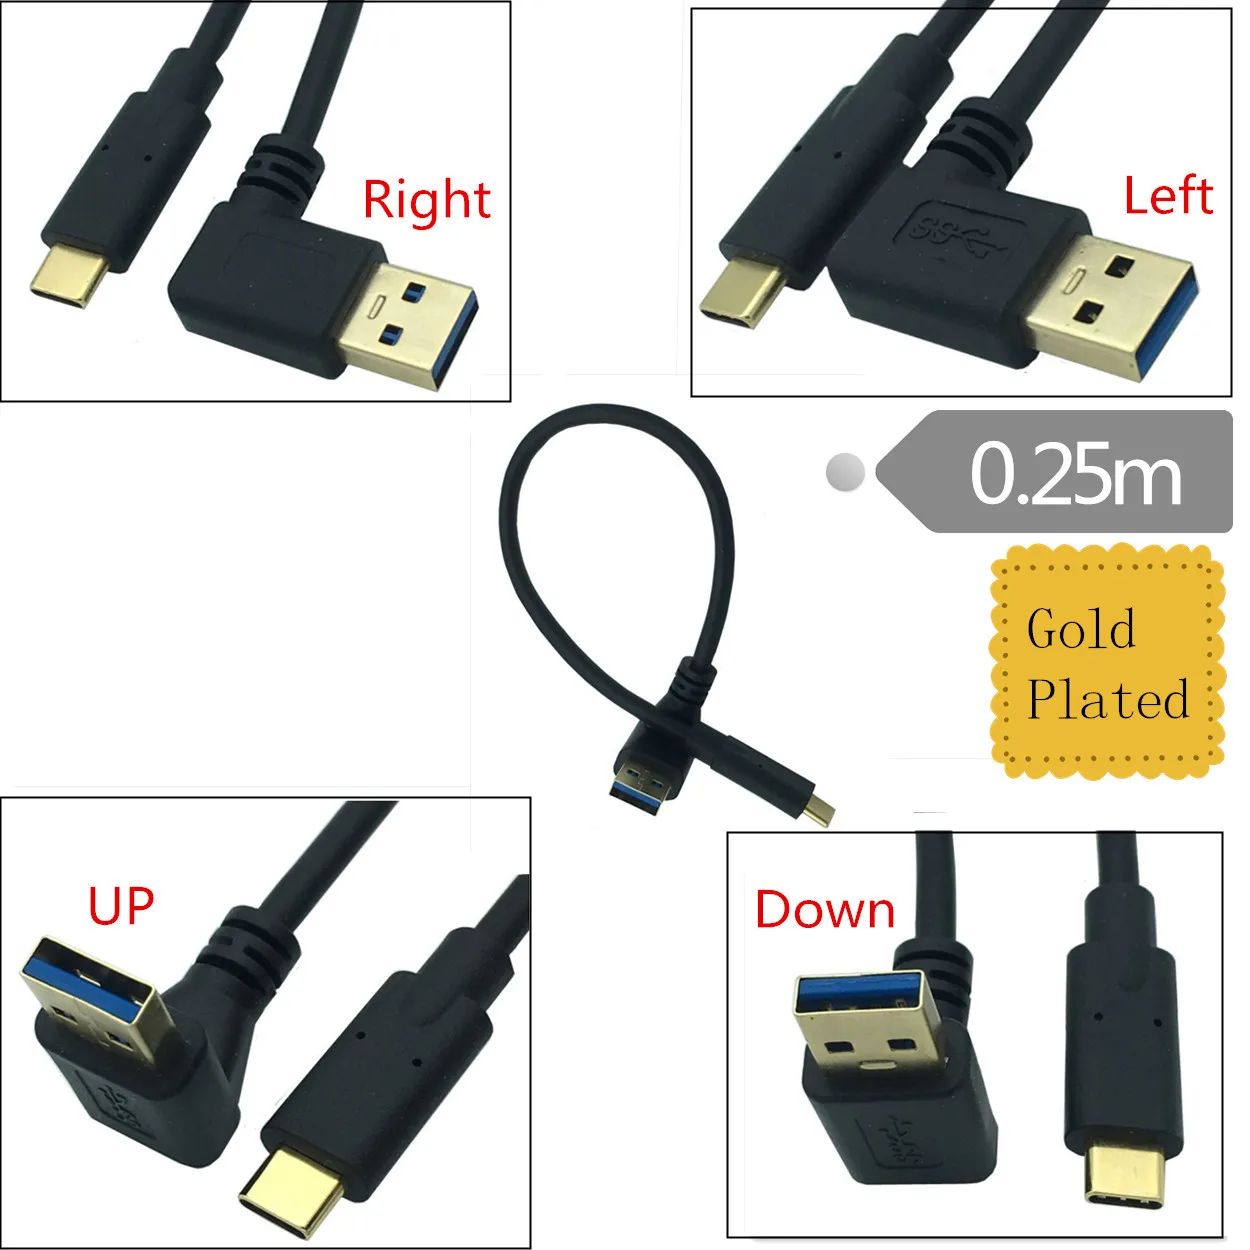 Купи 1PCS 25CM 90 Degree USB 3.0/2.0 Male to Female Adapter Cable Angle Extension Extender 5Gbps Fast Transmission Left/Right/Up/Down за 160 рублей в магазине AliExpress